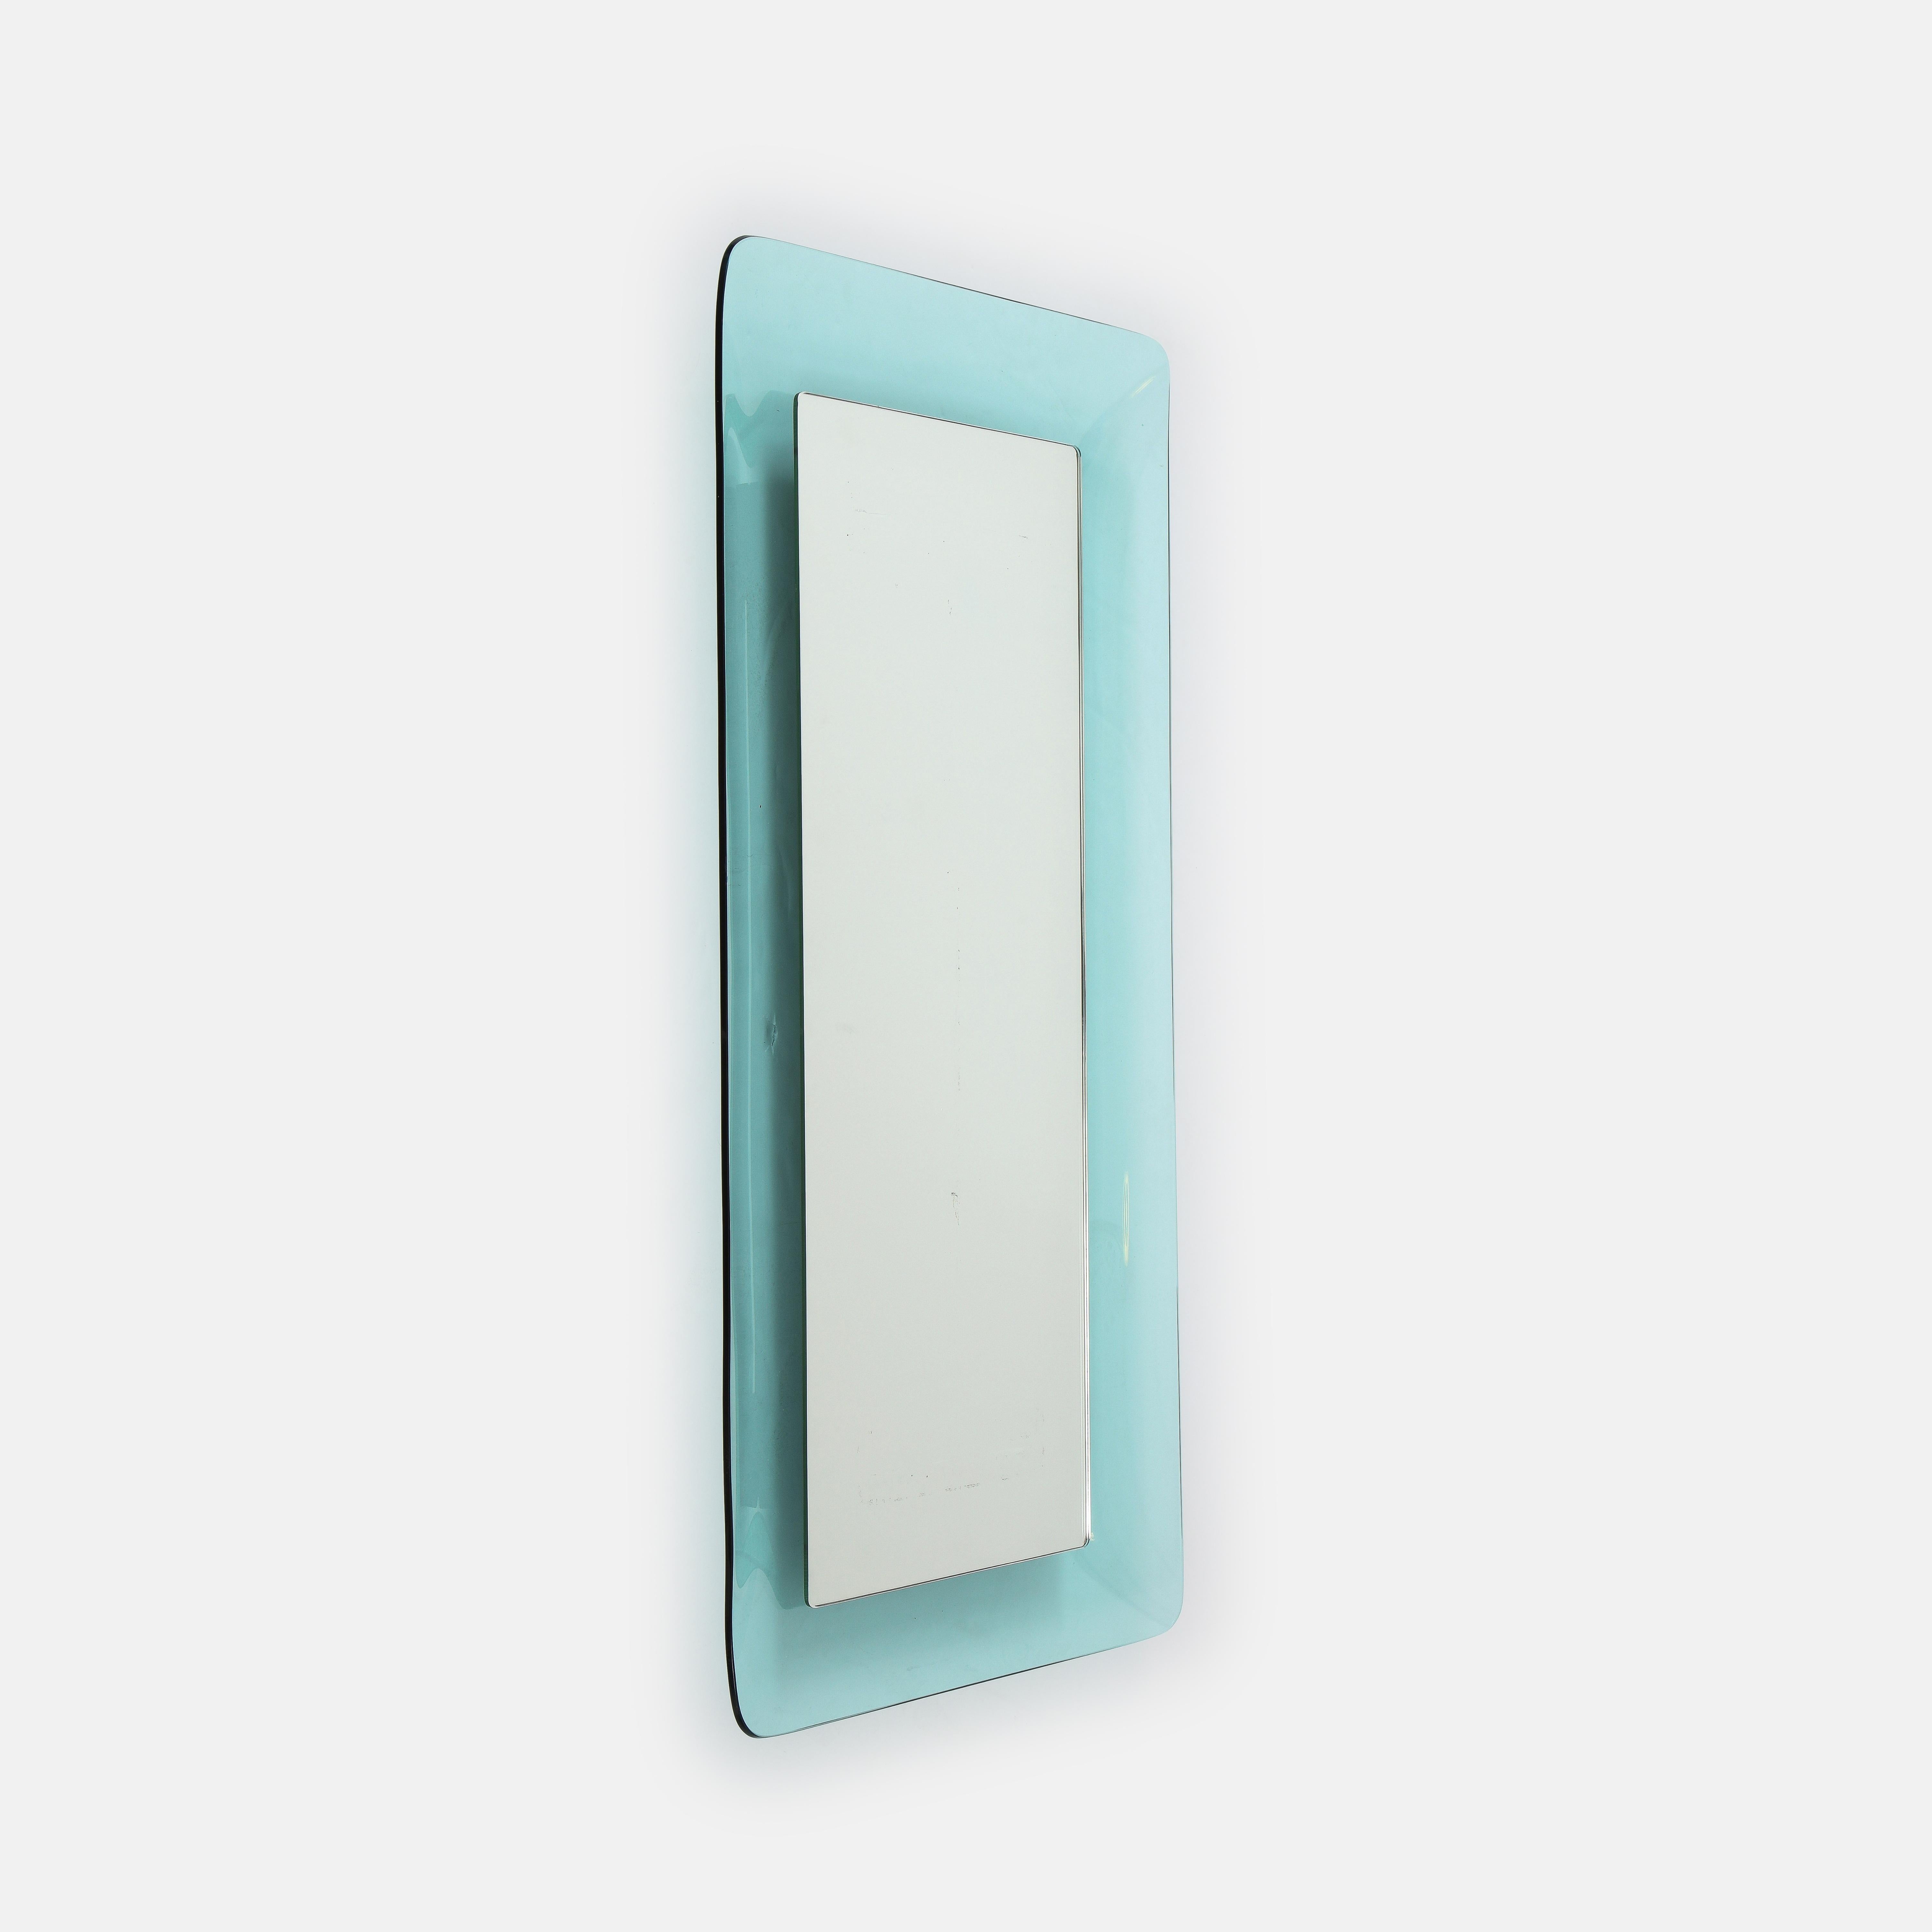 Max Ingrand for Fontana Arte large rectangular long mirror model 2273 in light blue colored, curved and profiled crystal glass framing mirrored glass, Italy, circa 1956. This elegant mirror with its subtle curves and simple form is a quintessential